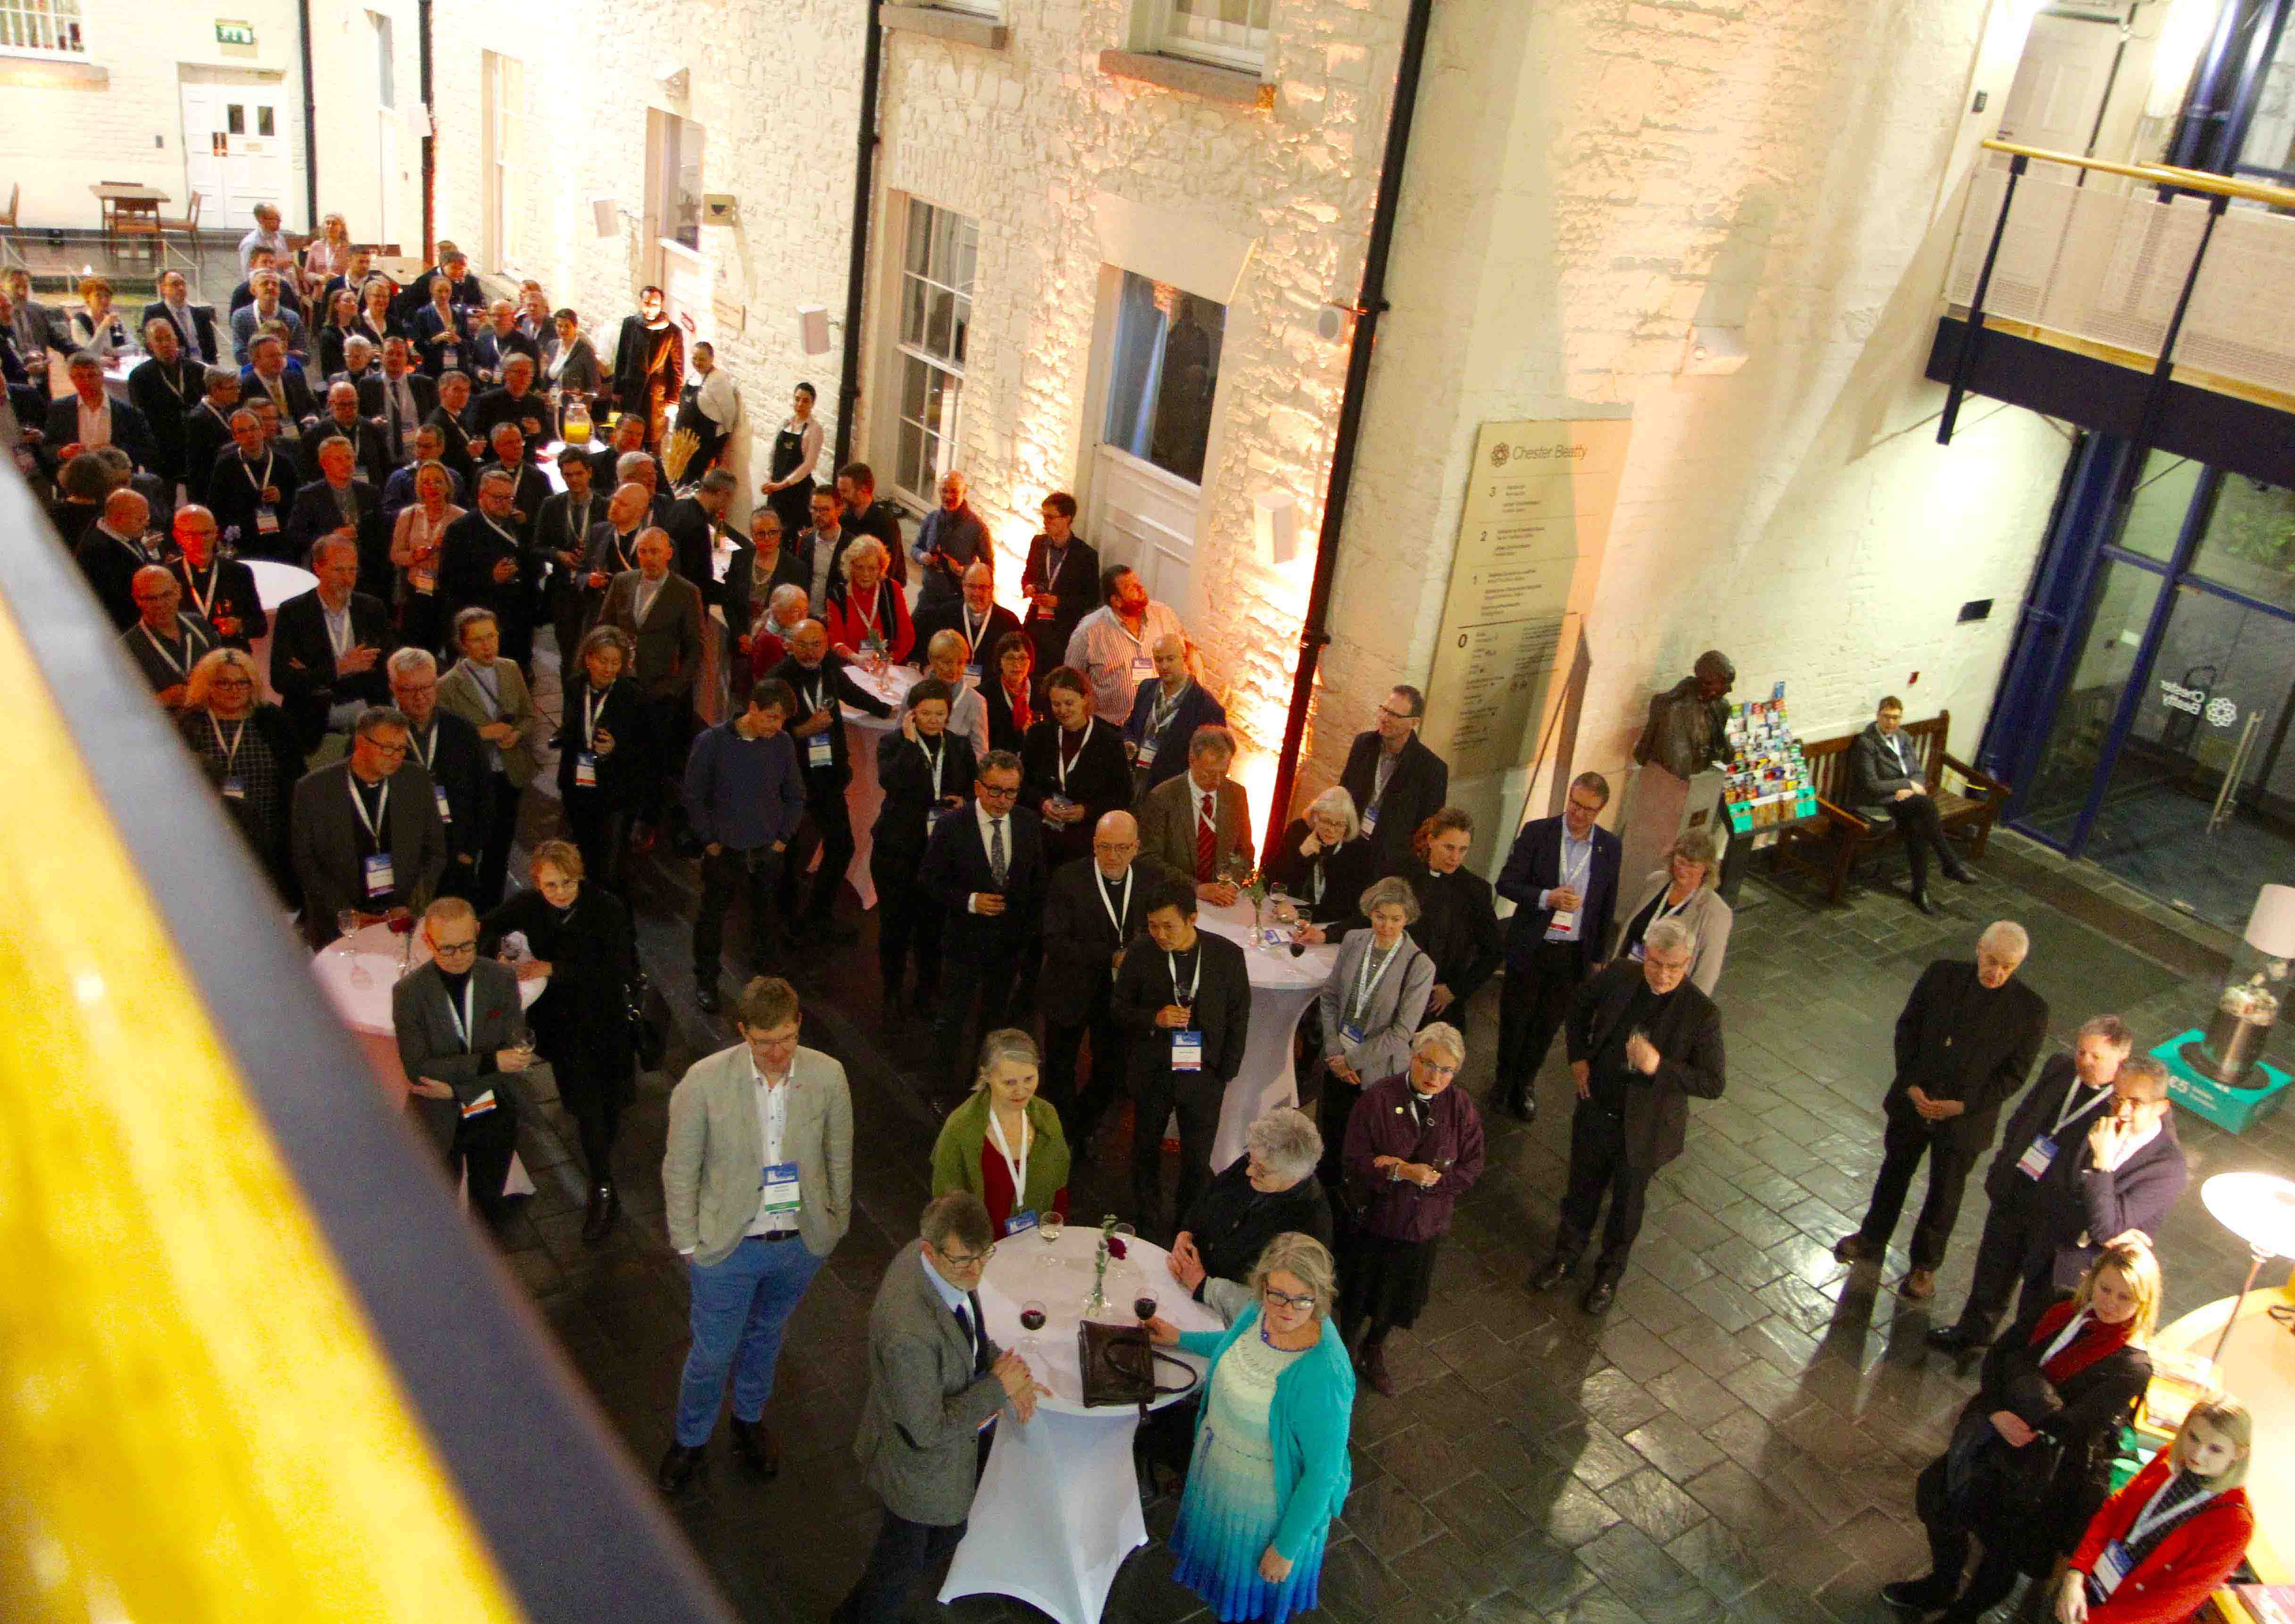 Delegates at the Northern European Cathedrals' Conference at the Archbishop of Dublin's reception in the Chester Beatty Library.